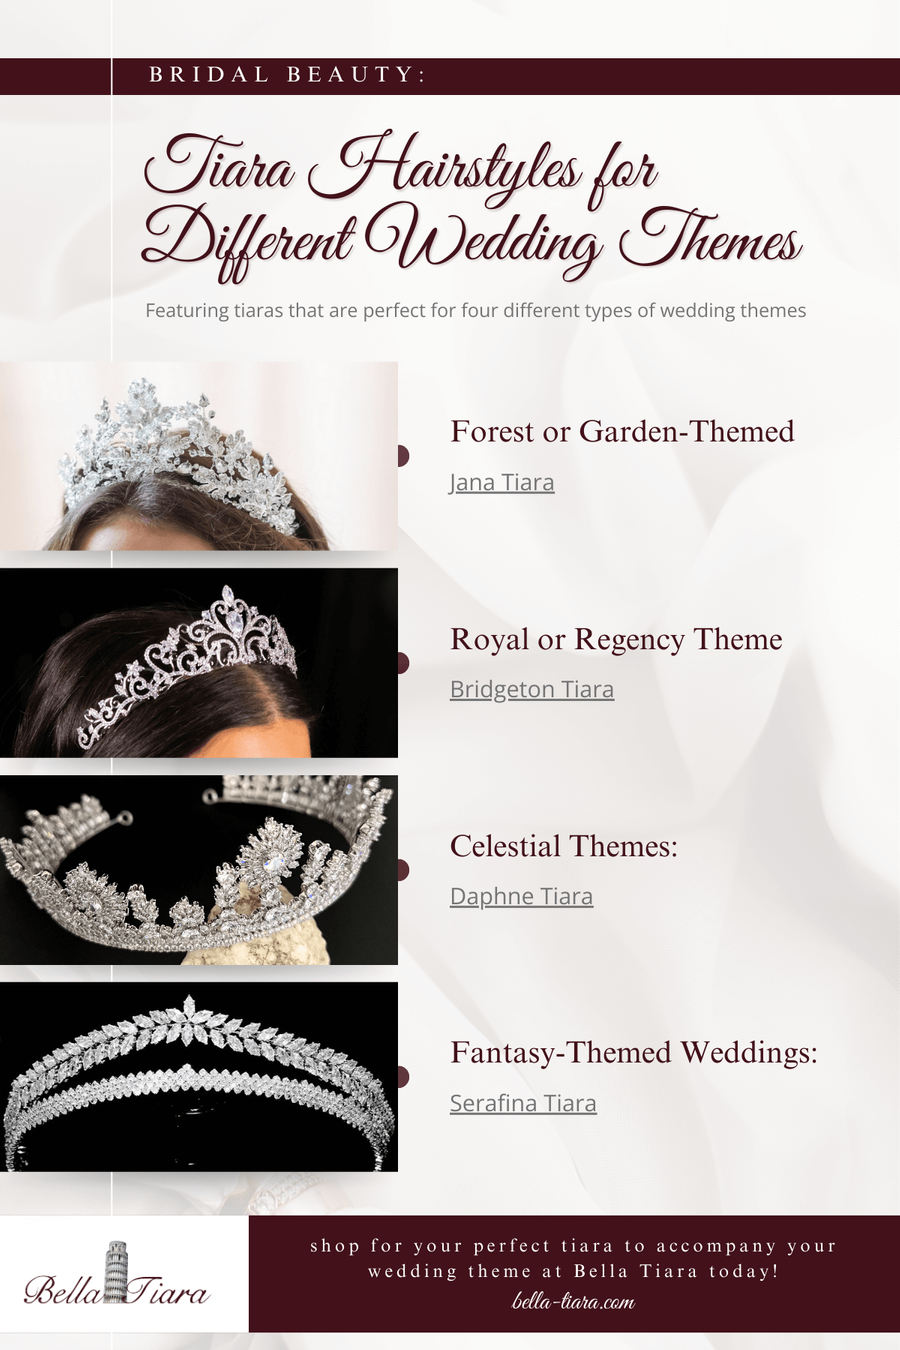 Bridal Beauty: Tiara Hairstyles for Different Wedding Themes infographic